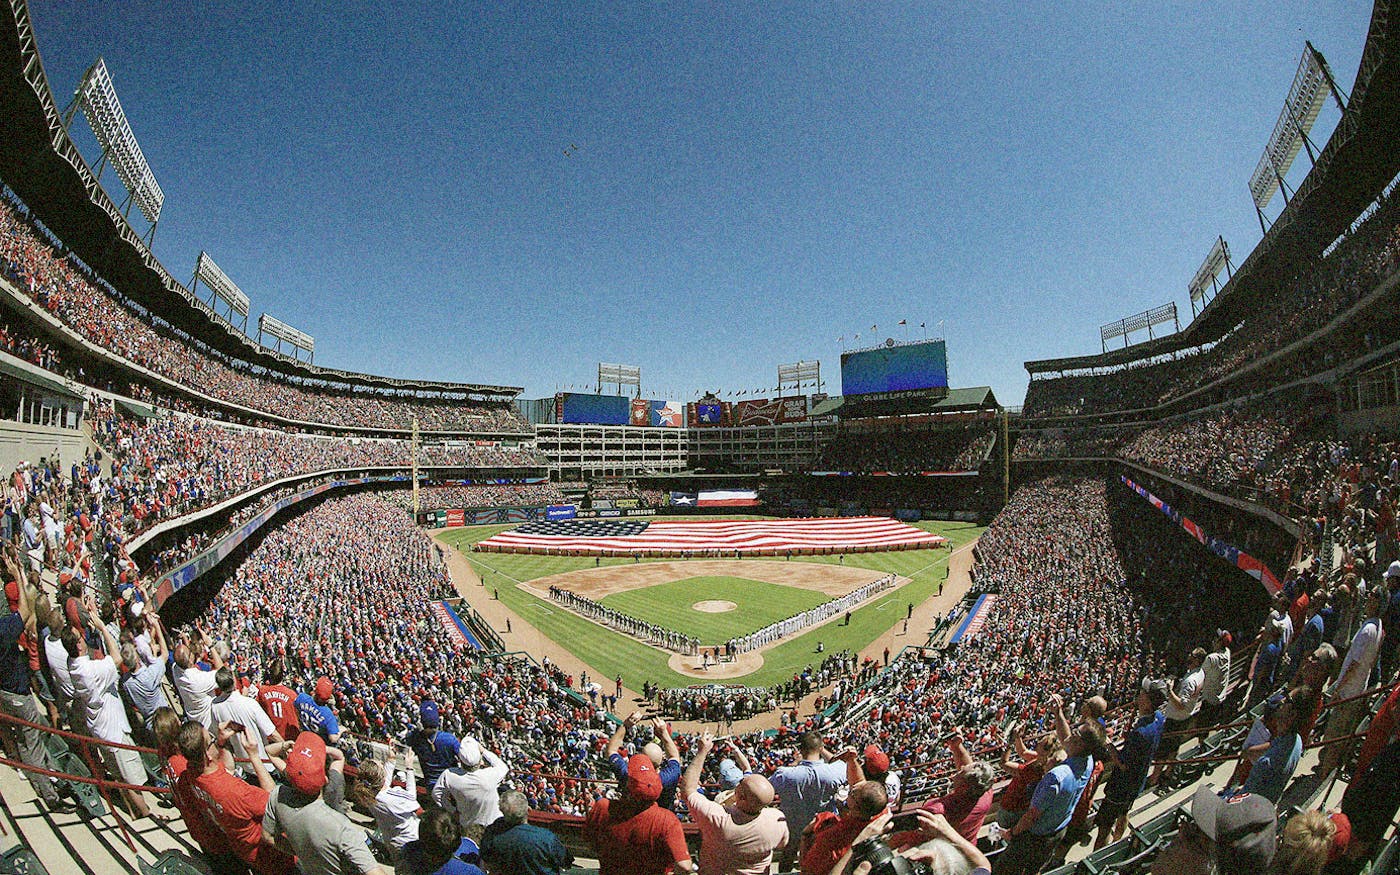 Texas Rangers to team up with fans to build 'best ballpark' in the league -  Dallas Business Journal